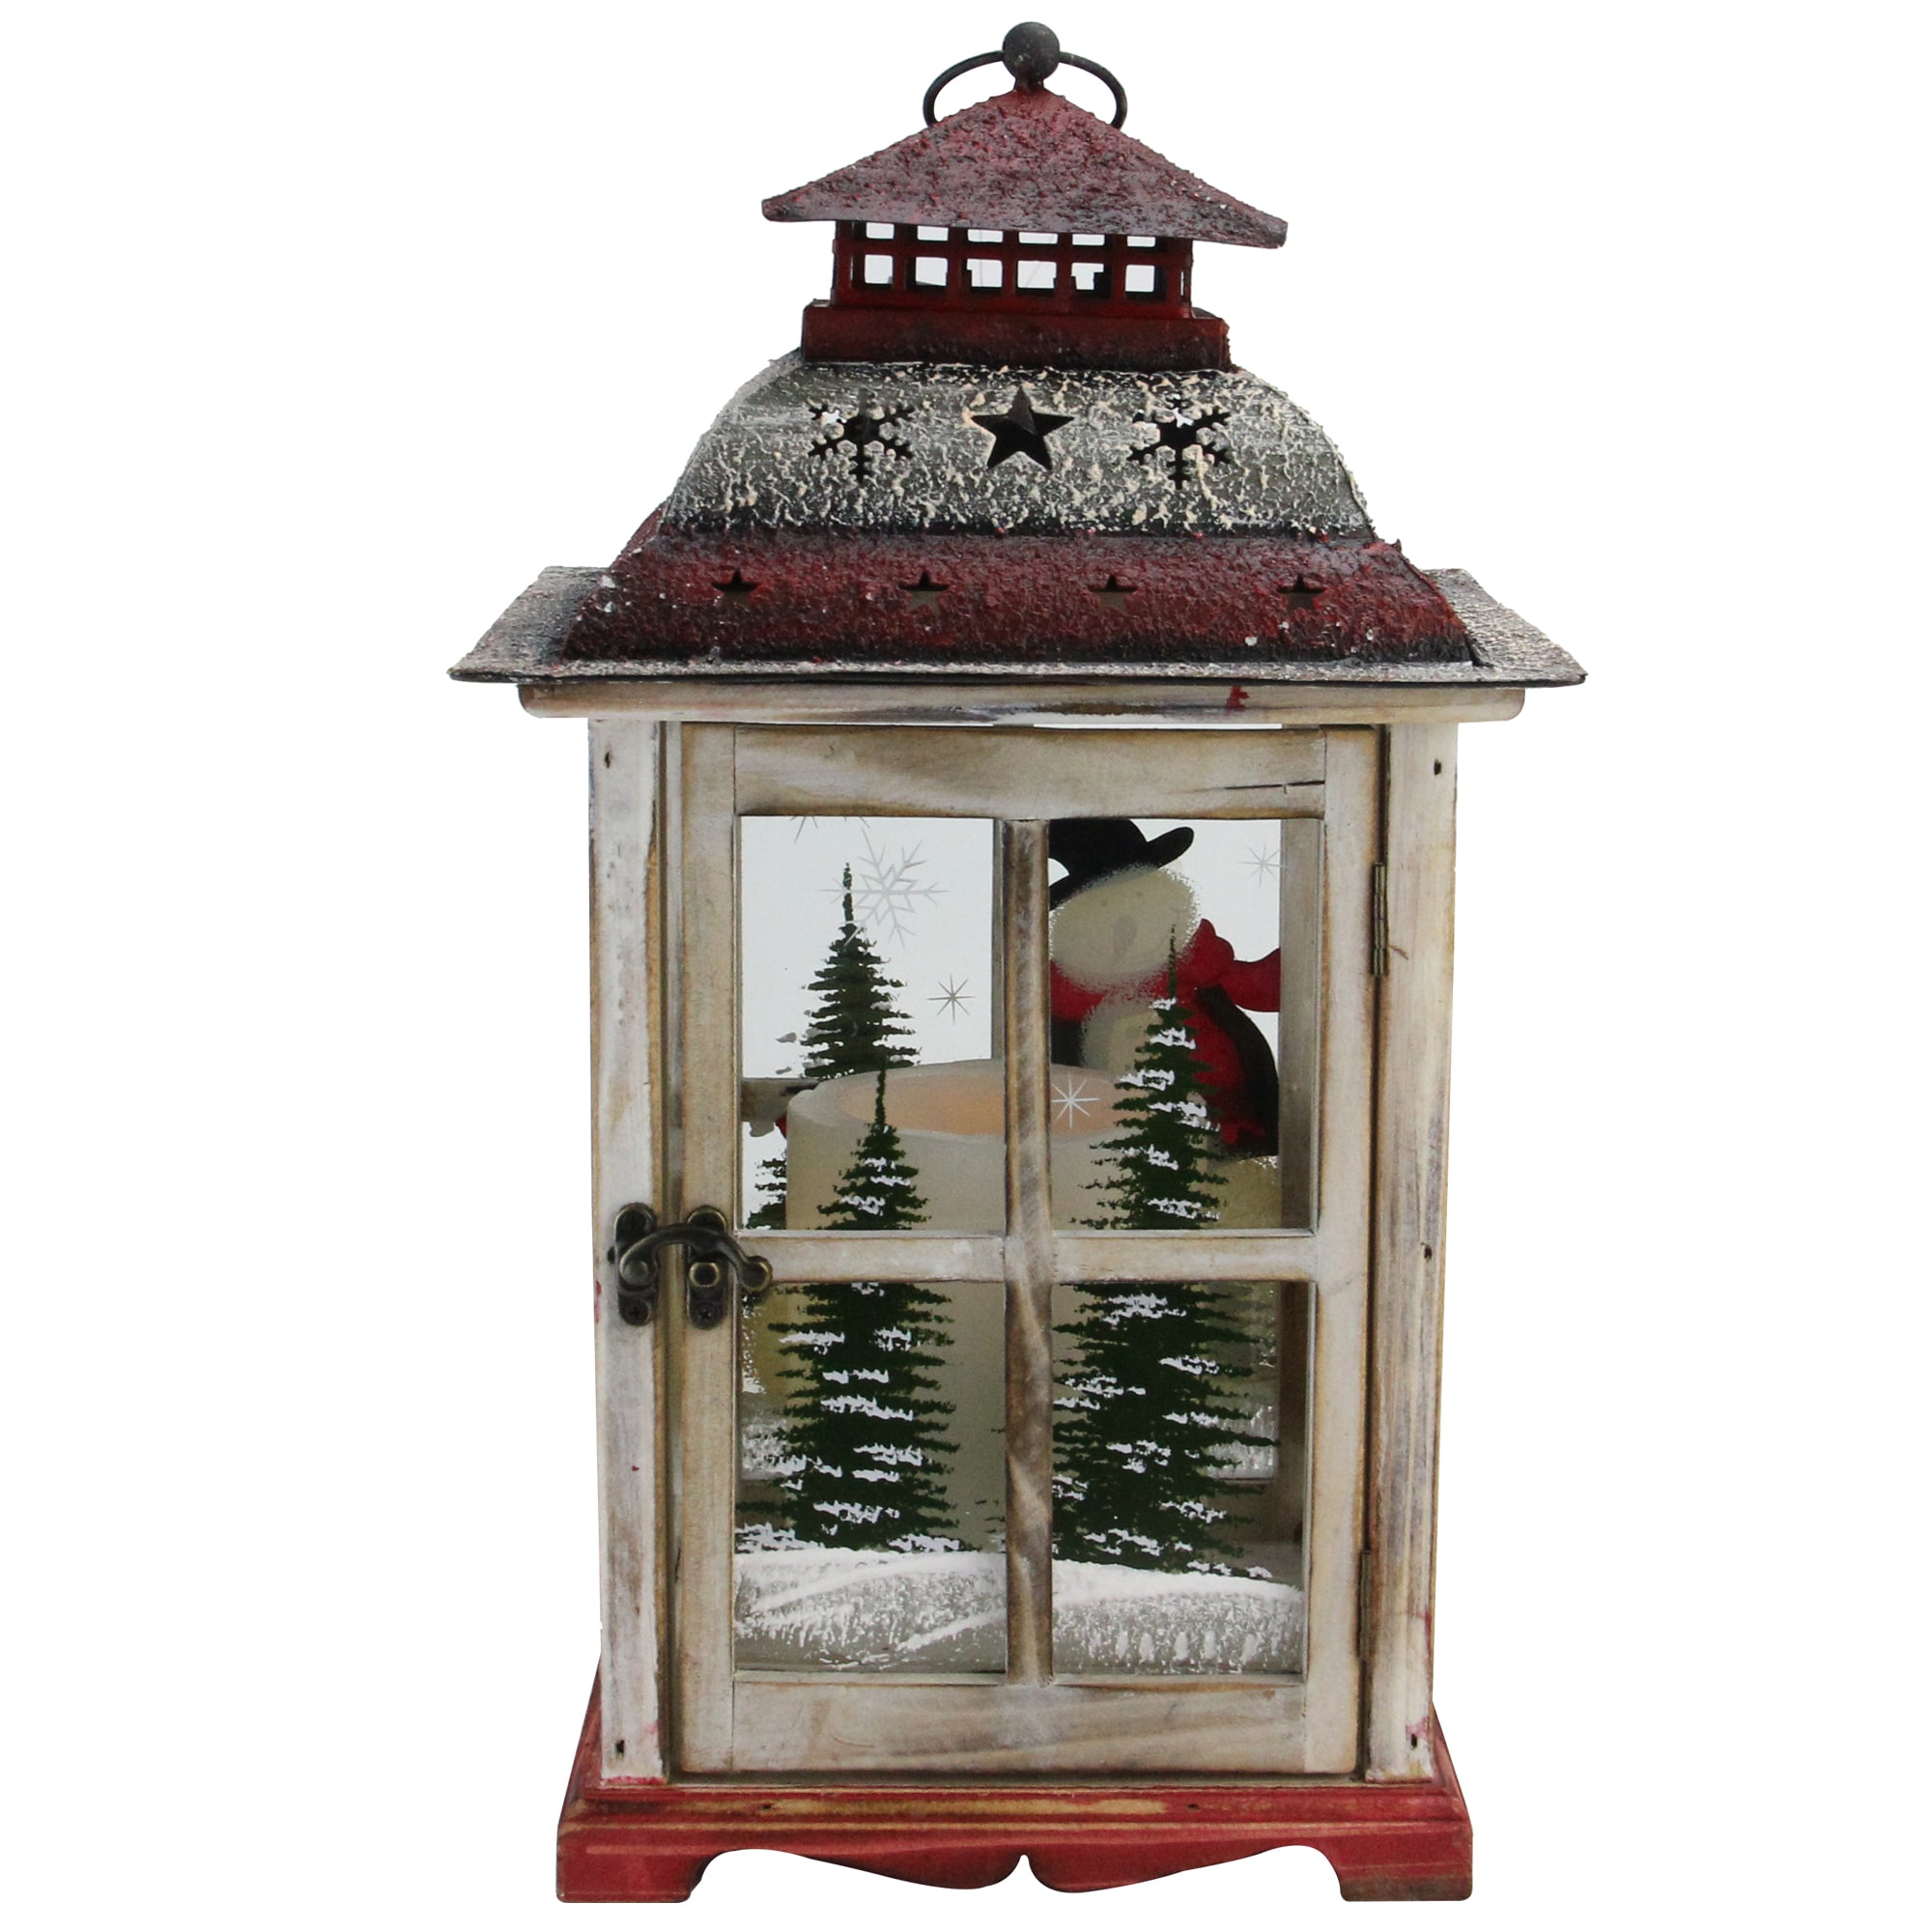 Northlight 1 Candle Lantern Candle Holder at Lowes.com